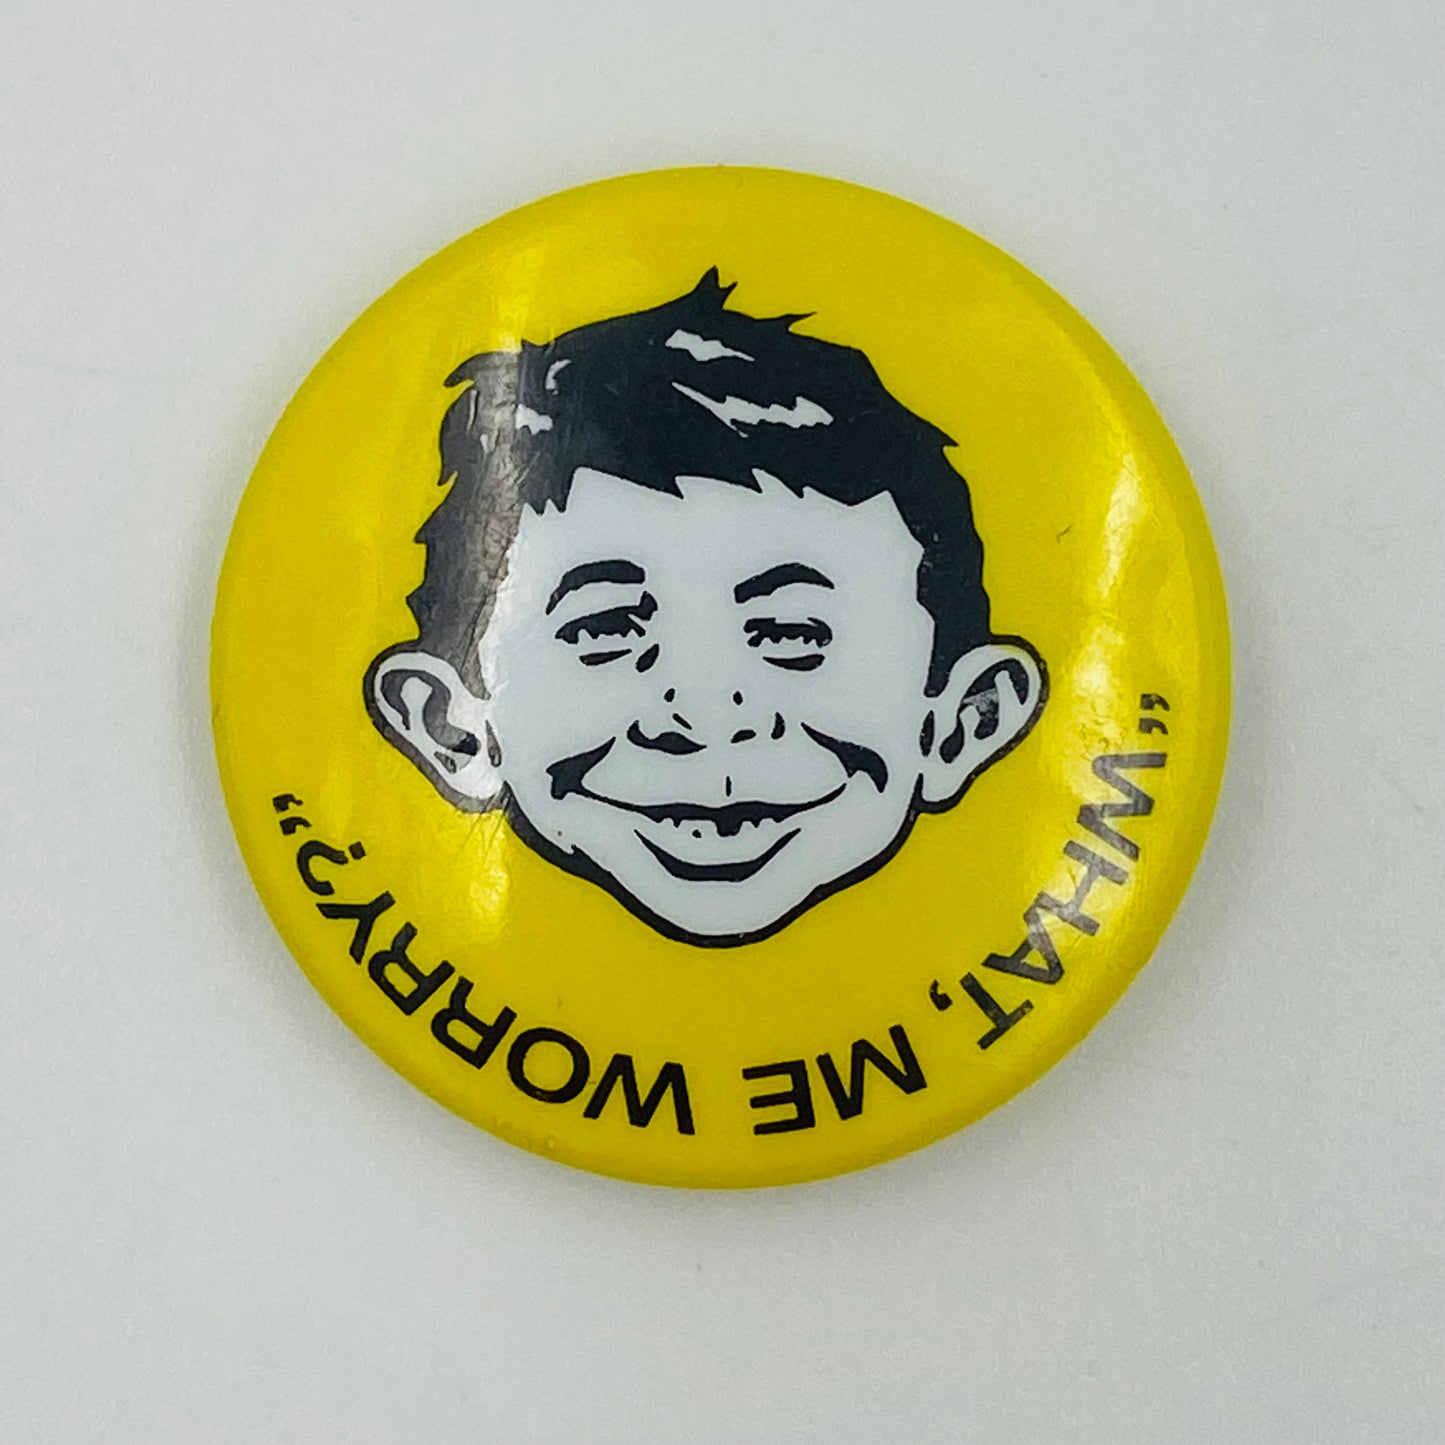 MAD Magazine Alfred E. Newman “What Me Worry?” pinback button (1993)